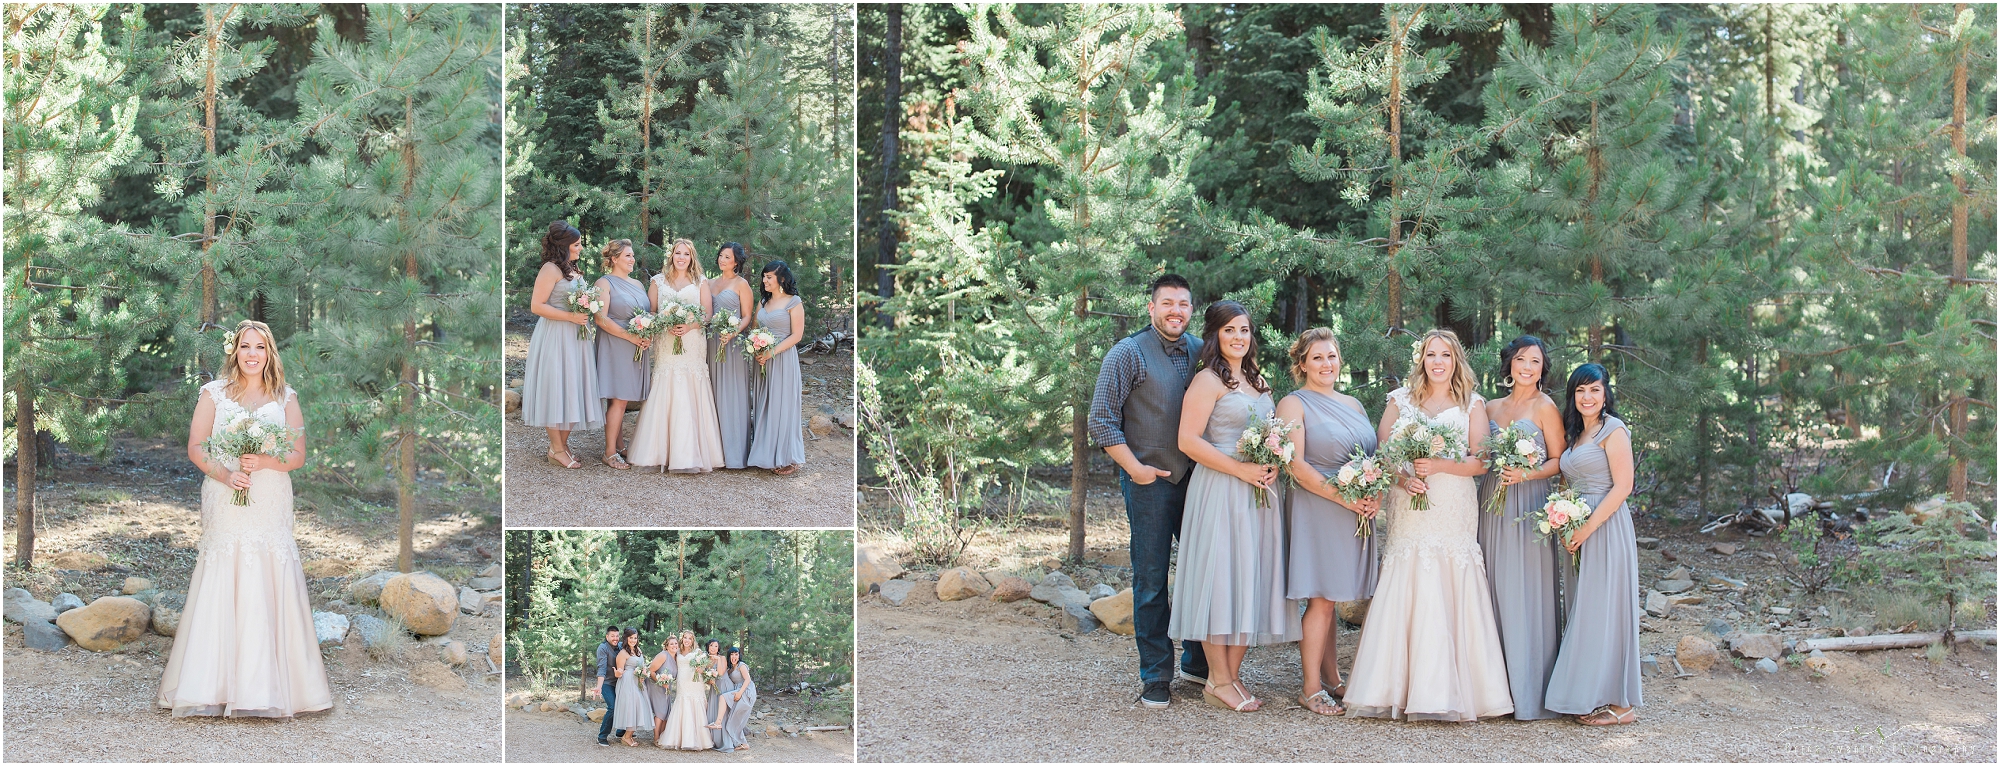 A non-traditional wedding party with a bride's man among the gals. 